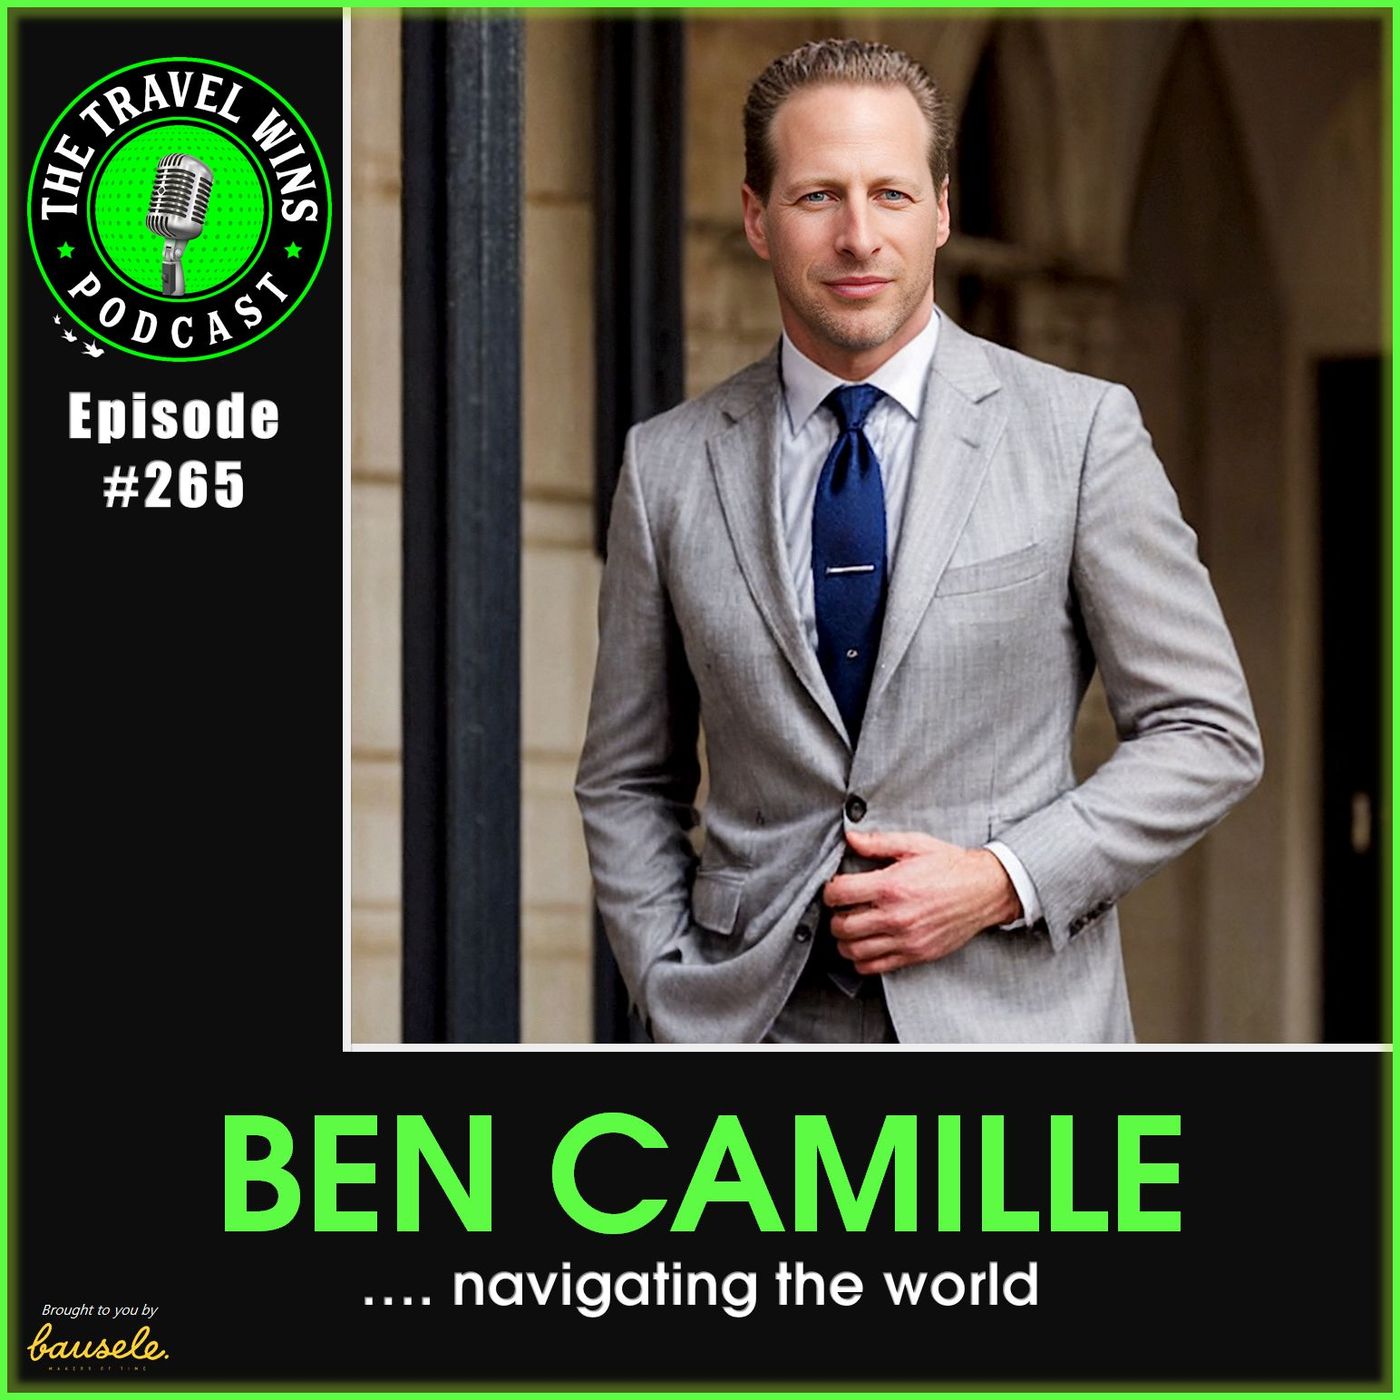 Ben Camille navigating the world - Ep. 265